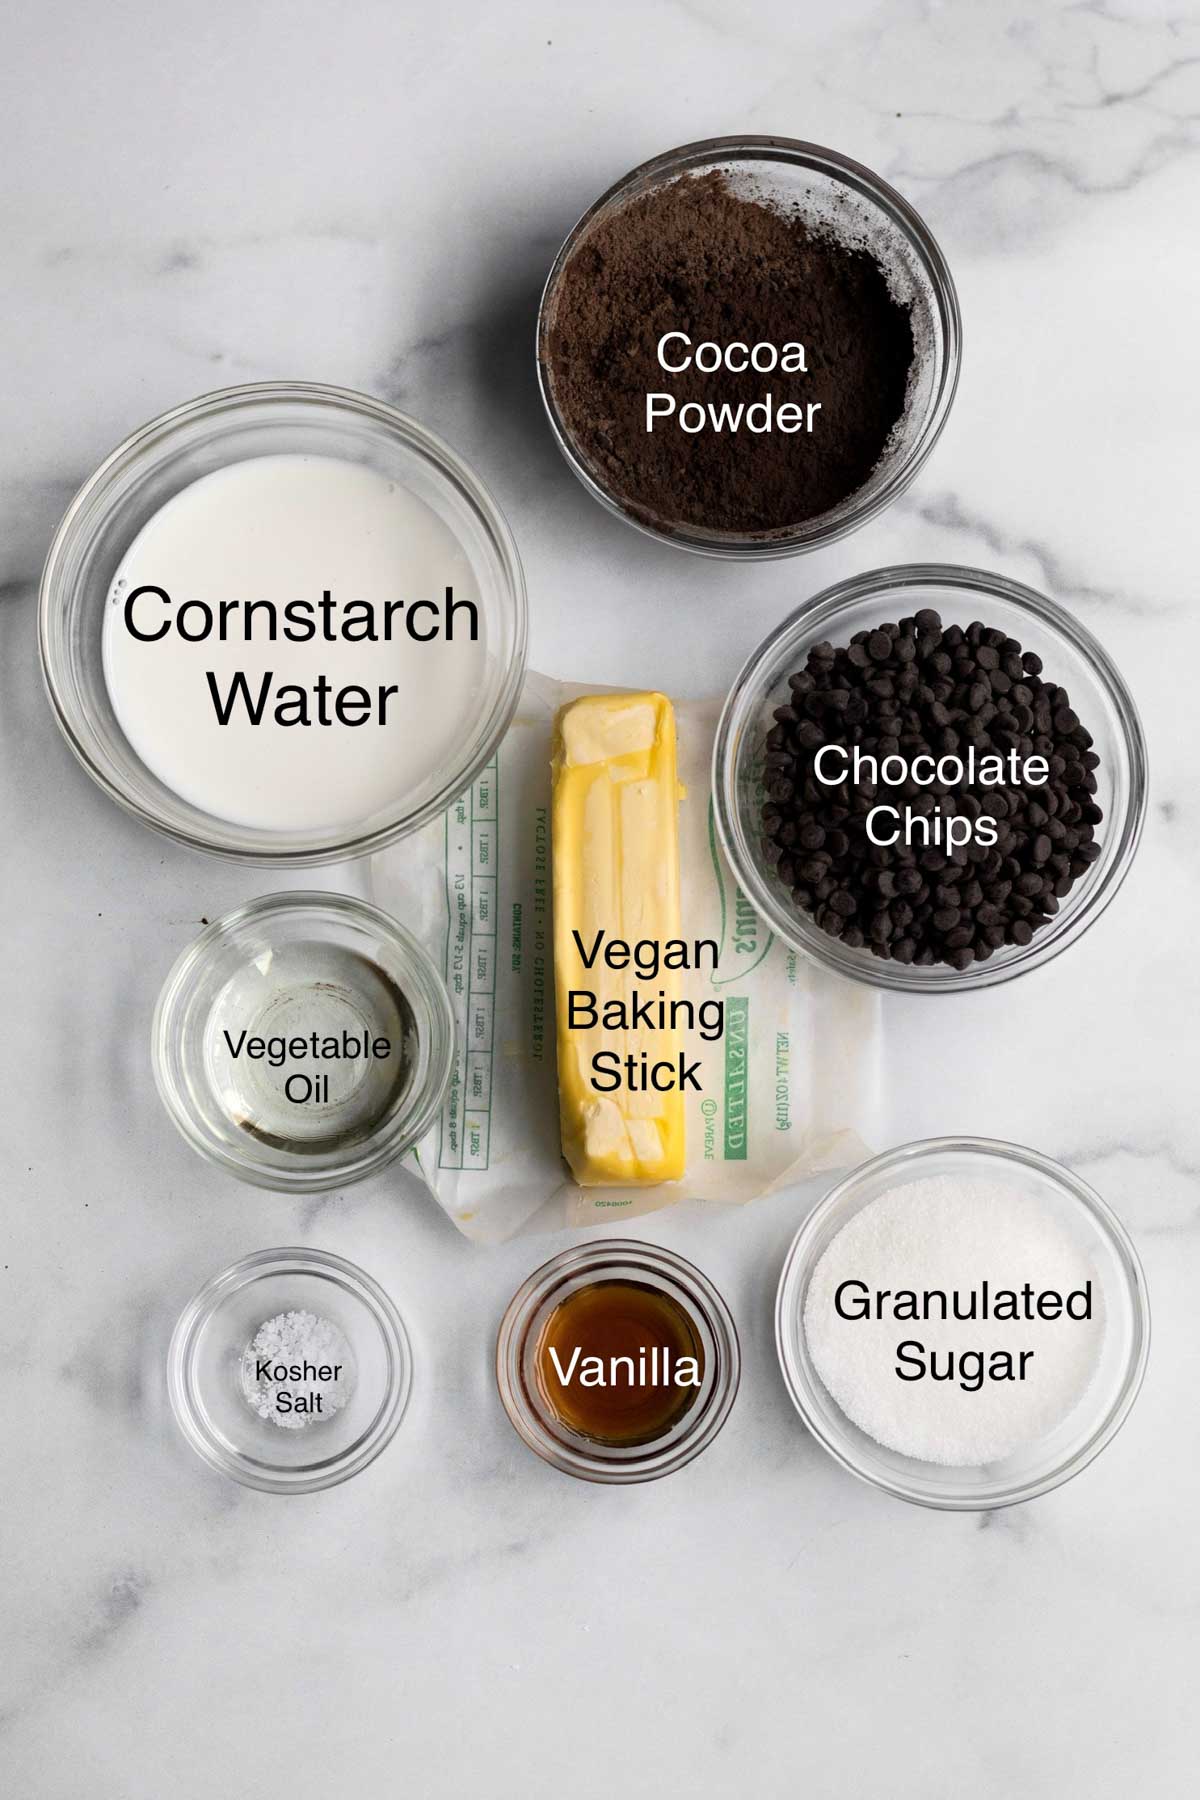 Cornstarch water, cocoa powder, chocolate chips, vegetable oil, a vegan baking stick, kosher salt, vanilla and granulated sugar in separate glass bowls.